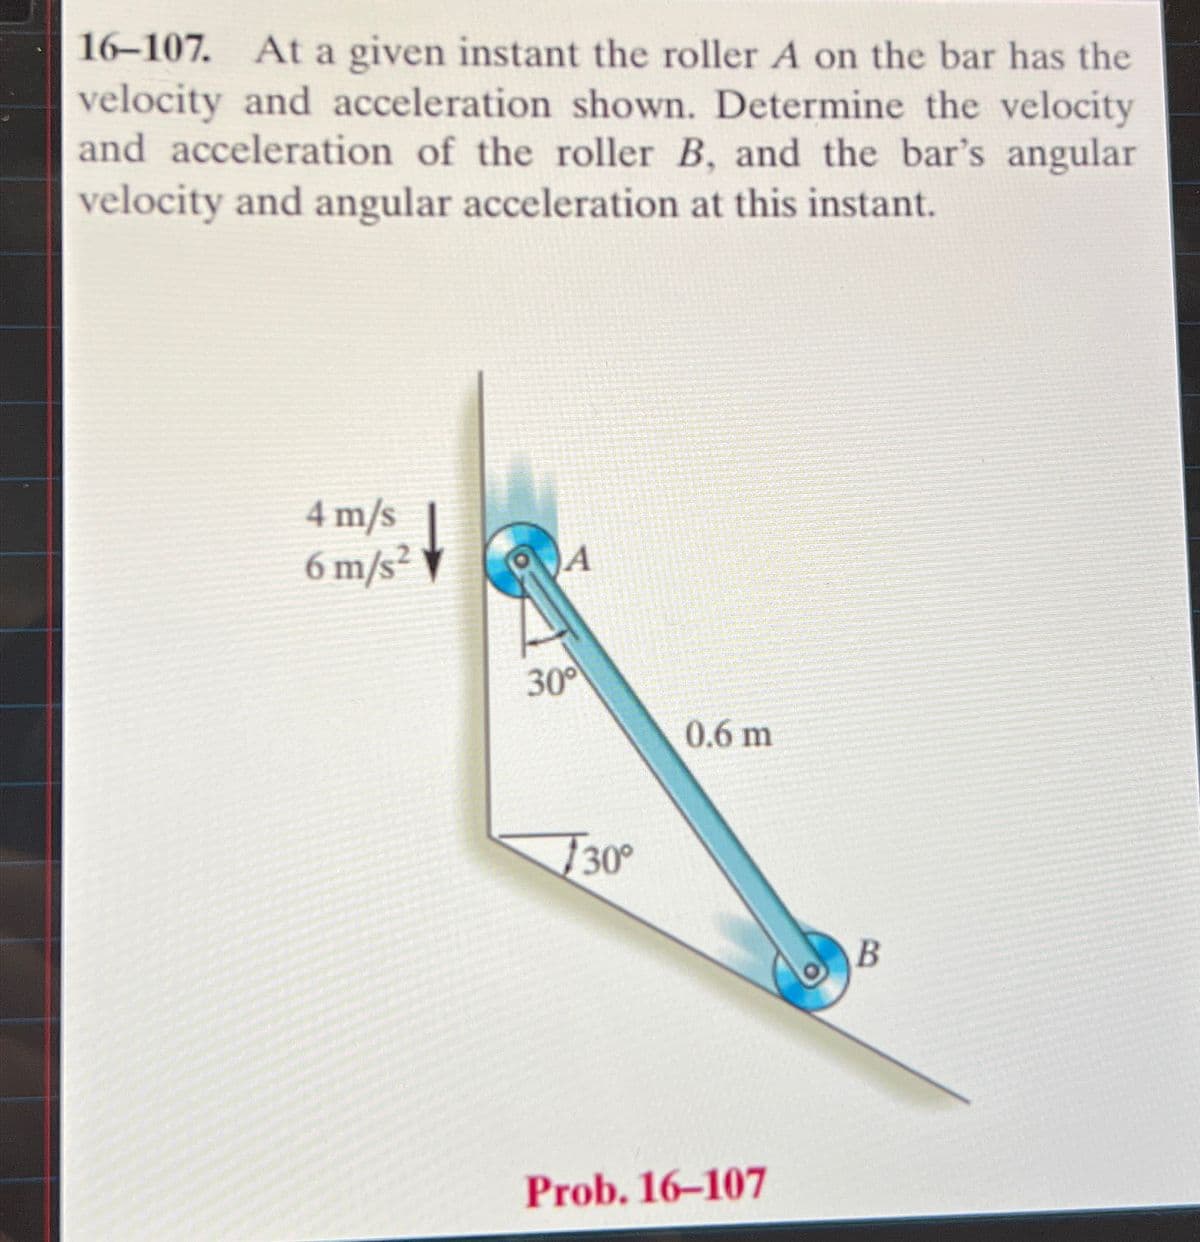 16-107. At a given instant the roller A on the bar has the
velocity and acceleration shown. Determine the velocity
and acceleration of the roller B, and the bar's angular
velocity and angular acceleration at this instant.
4 m/s
6 m/s²
A
30°
0.6 m
30°
Prob. 16-107
B